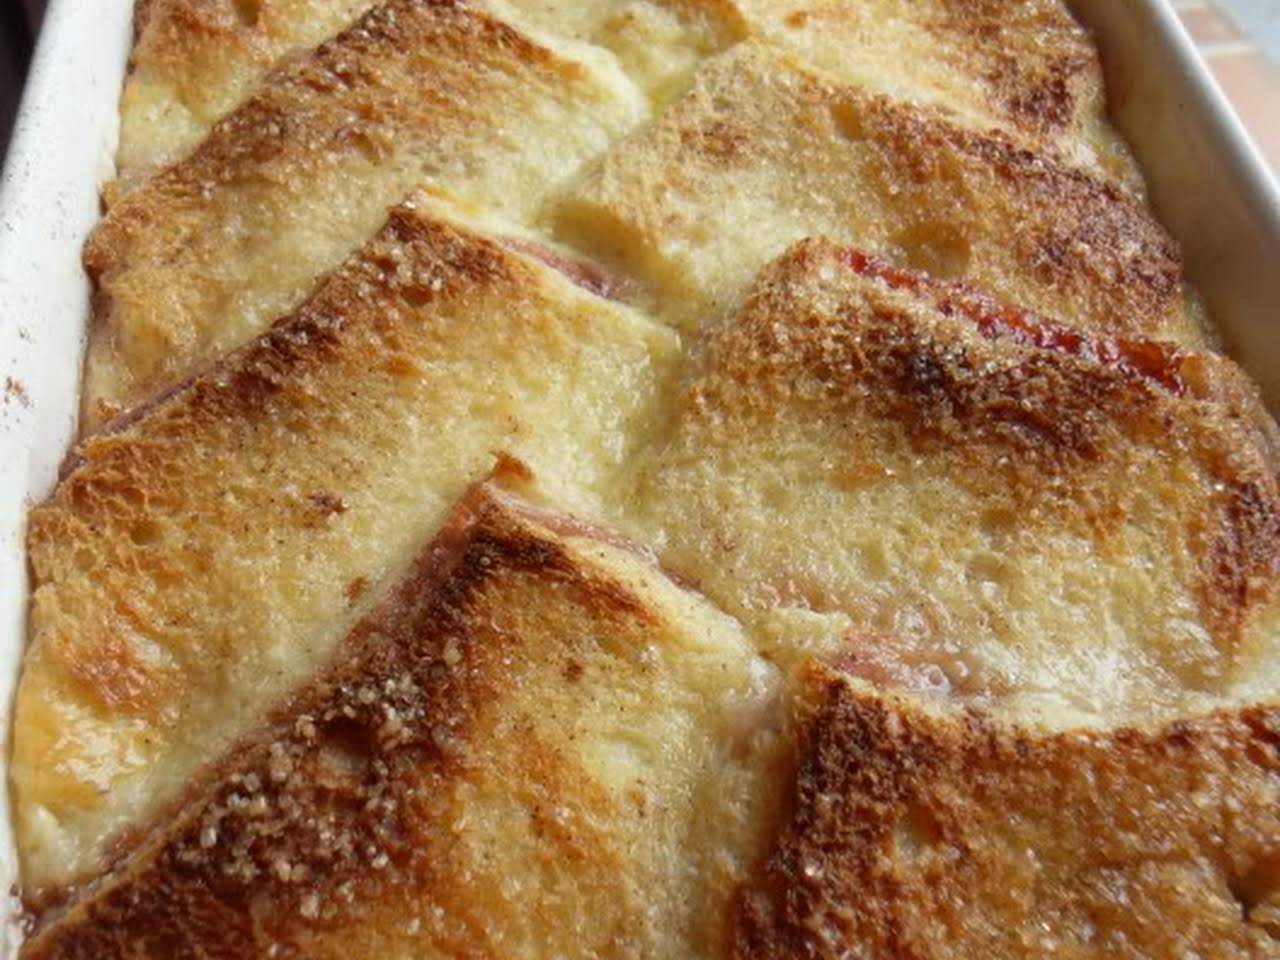 10 Best Bread And Butter Pudding Without Raisins Recipes Yummly